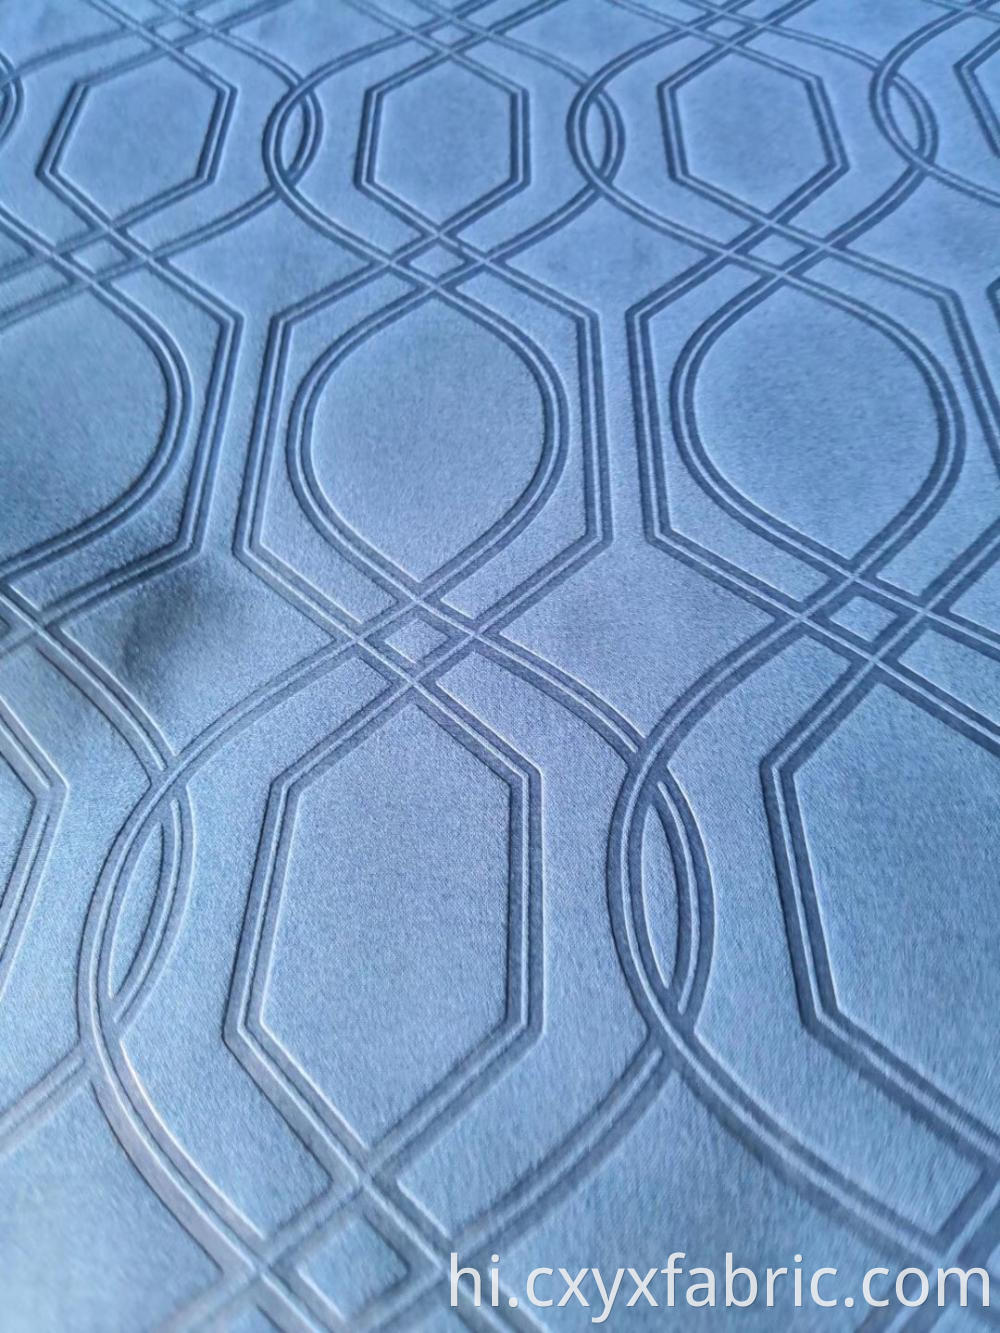 polyester knit fabric